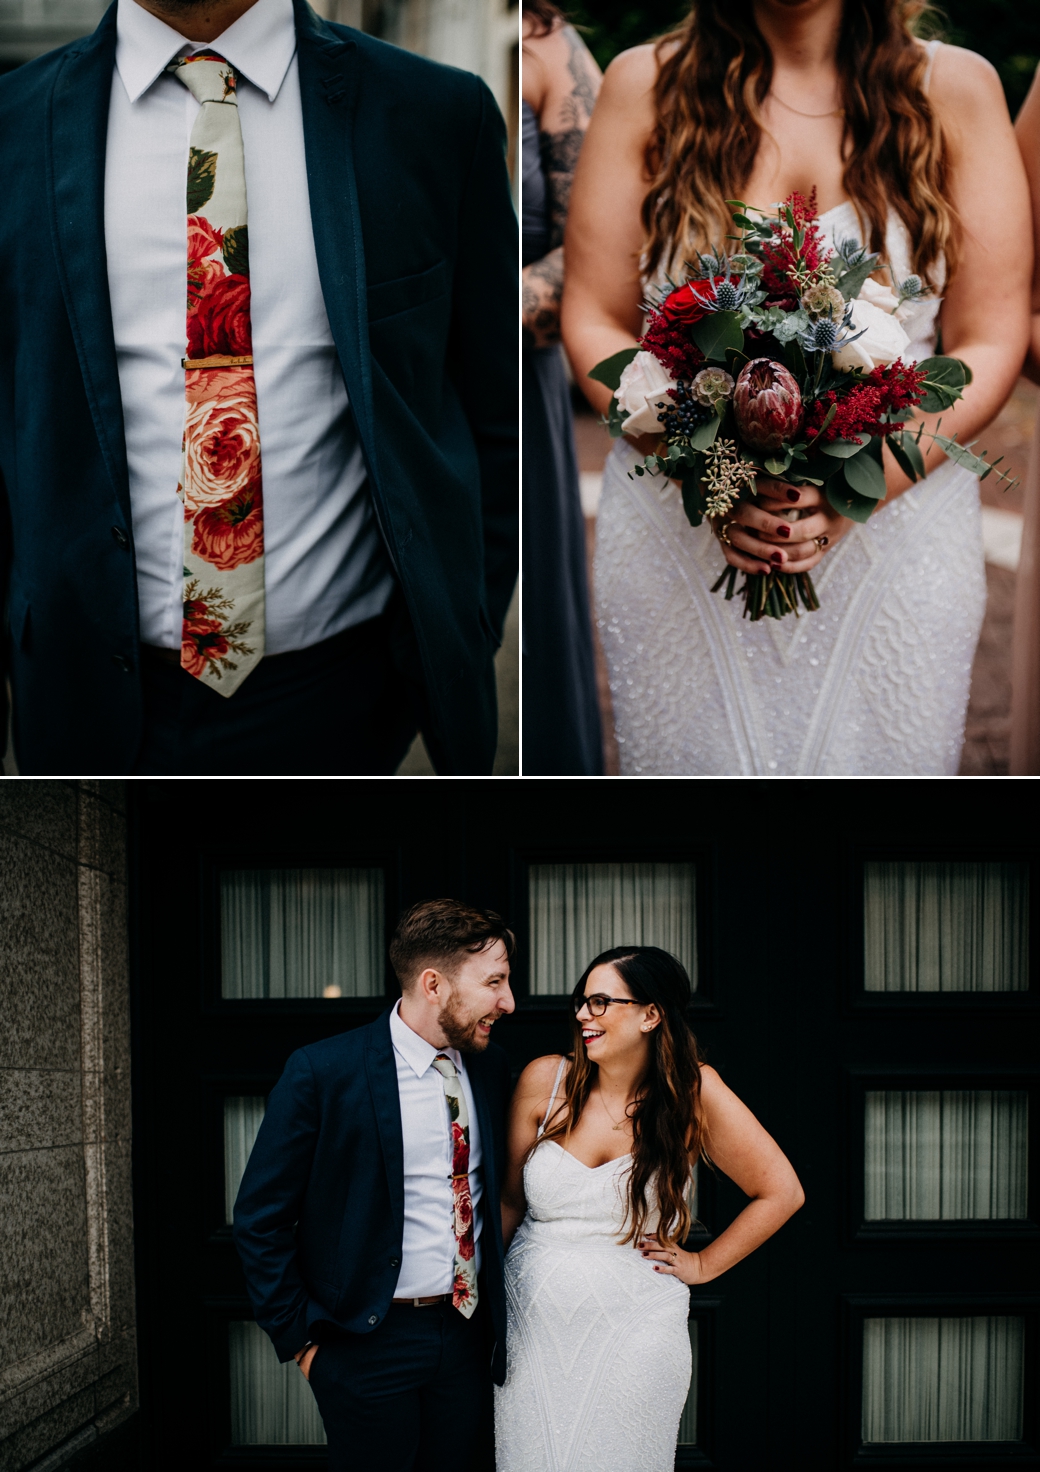 A bride holds a bouquet of colorful florals that mimic the colorful florals in the groom's tie.